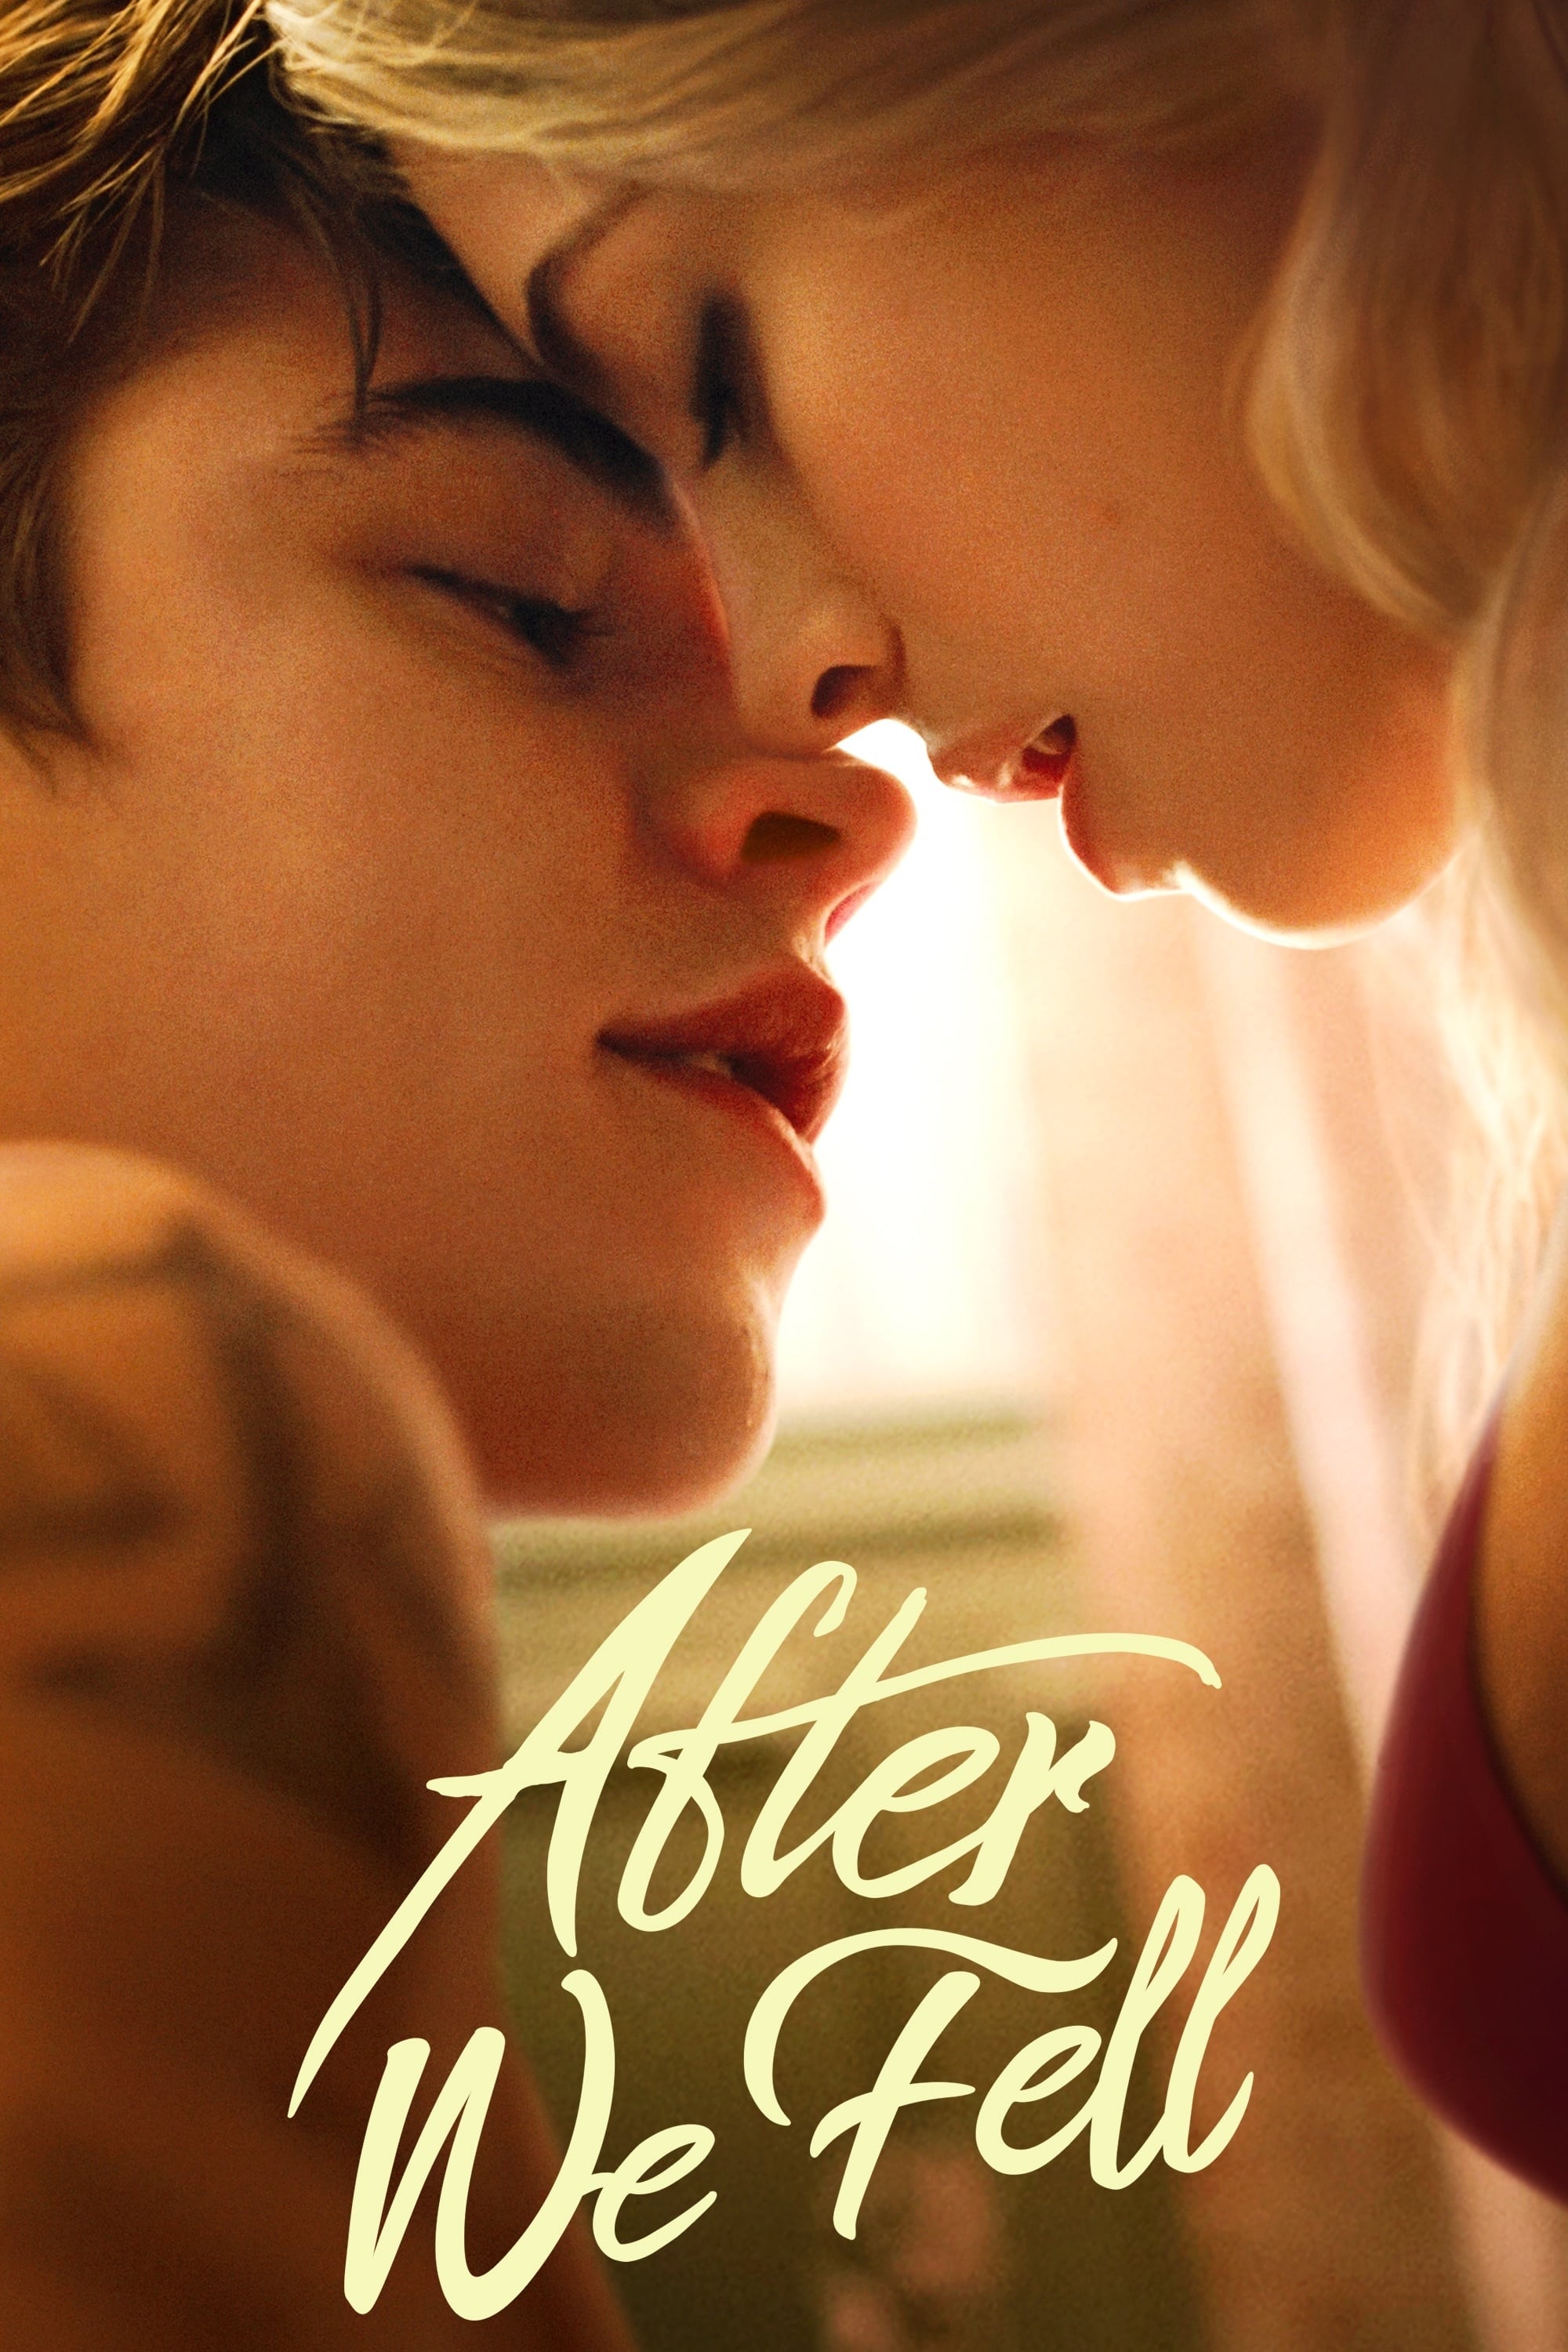 After Love (2021)